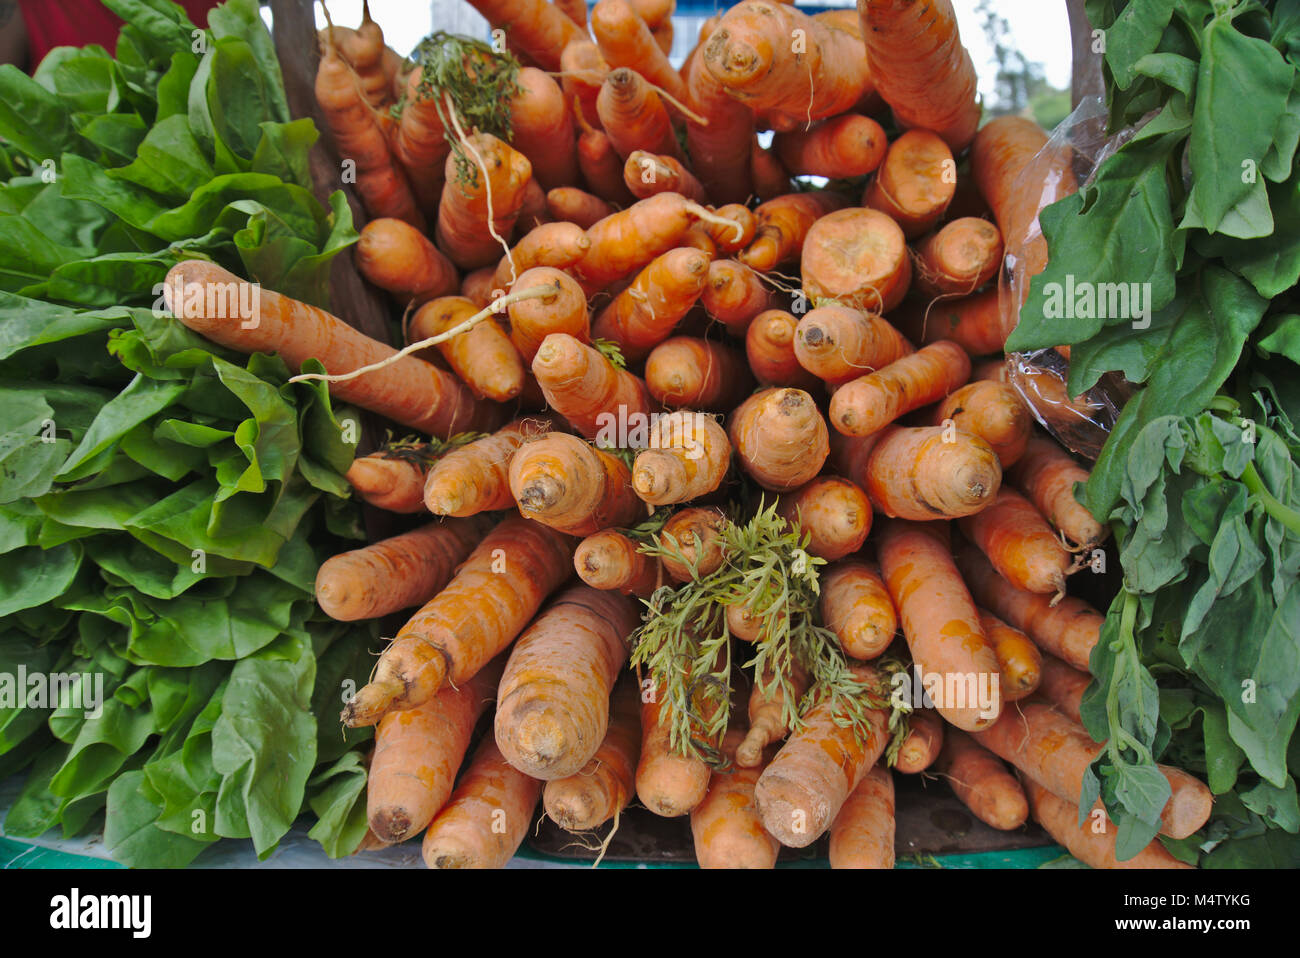 Carrots at a farmers market stall. Stock Photo